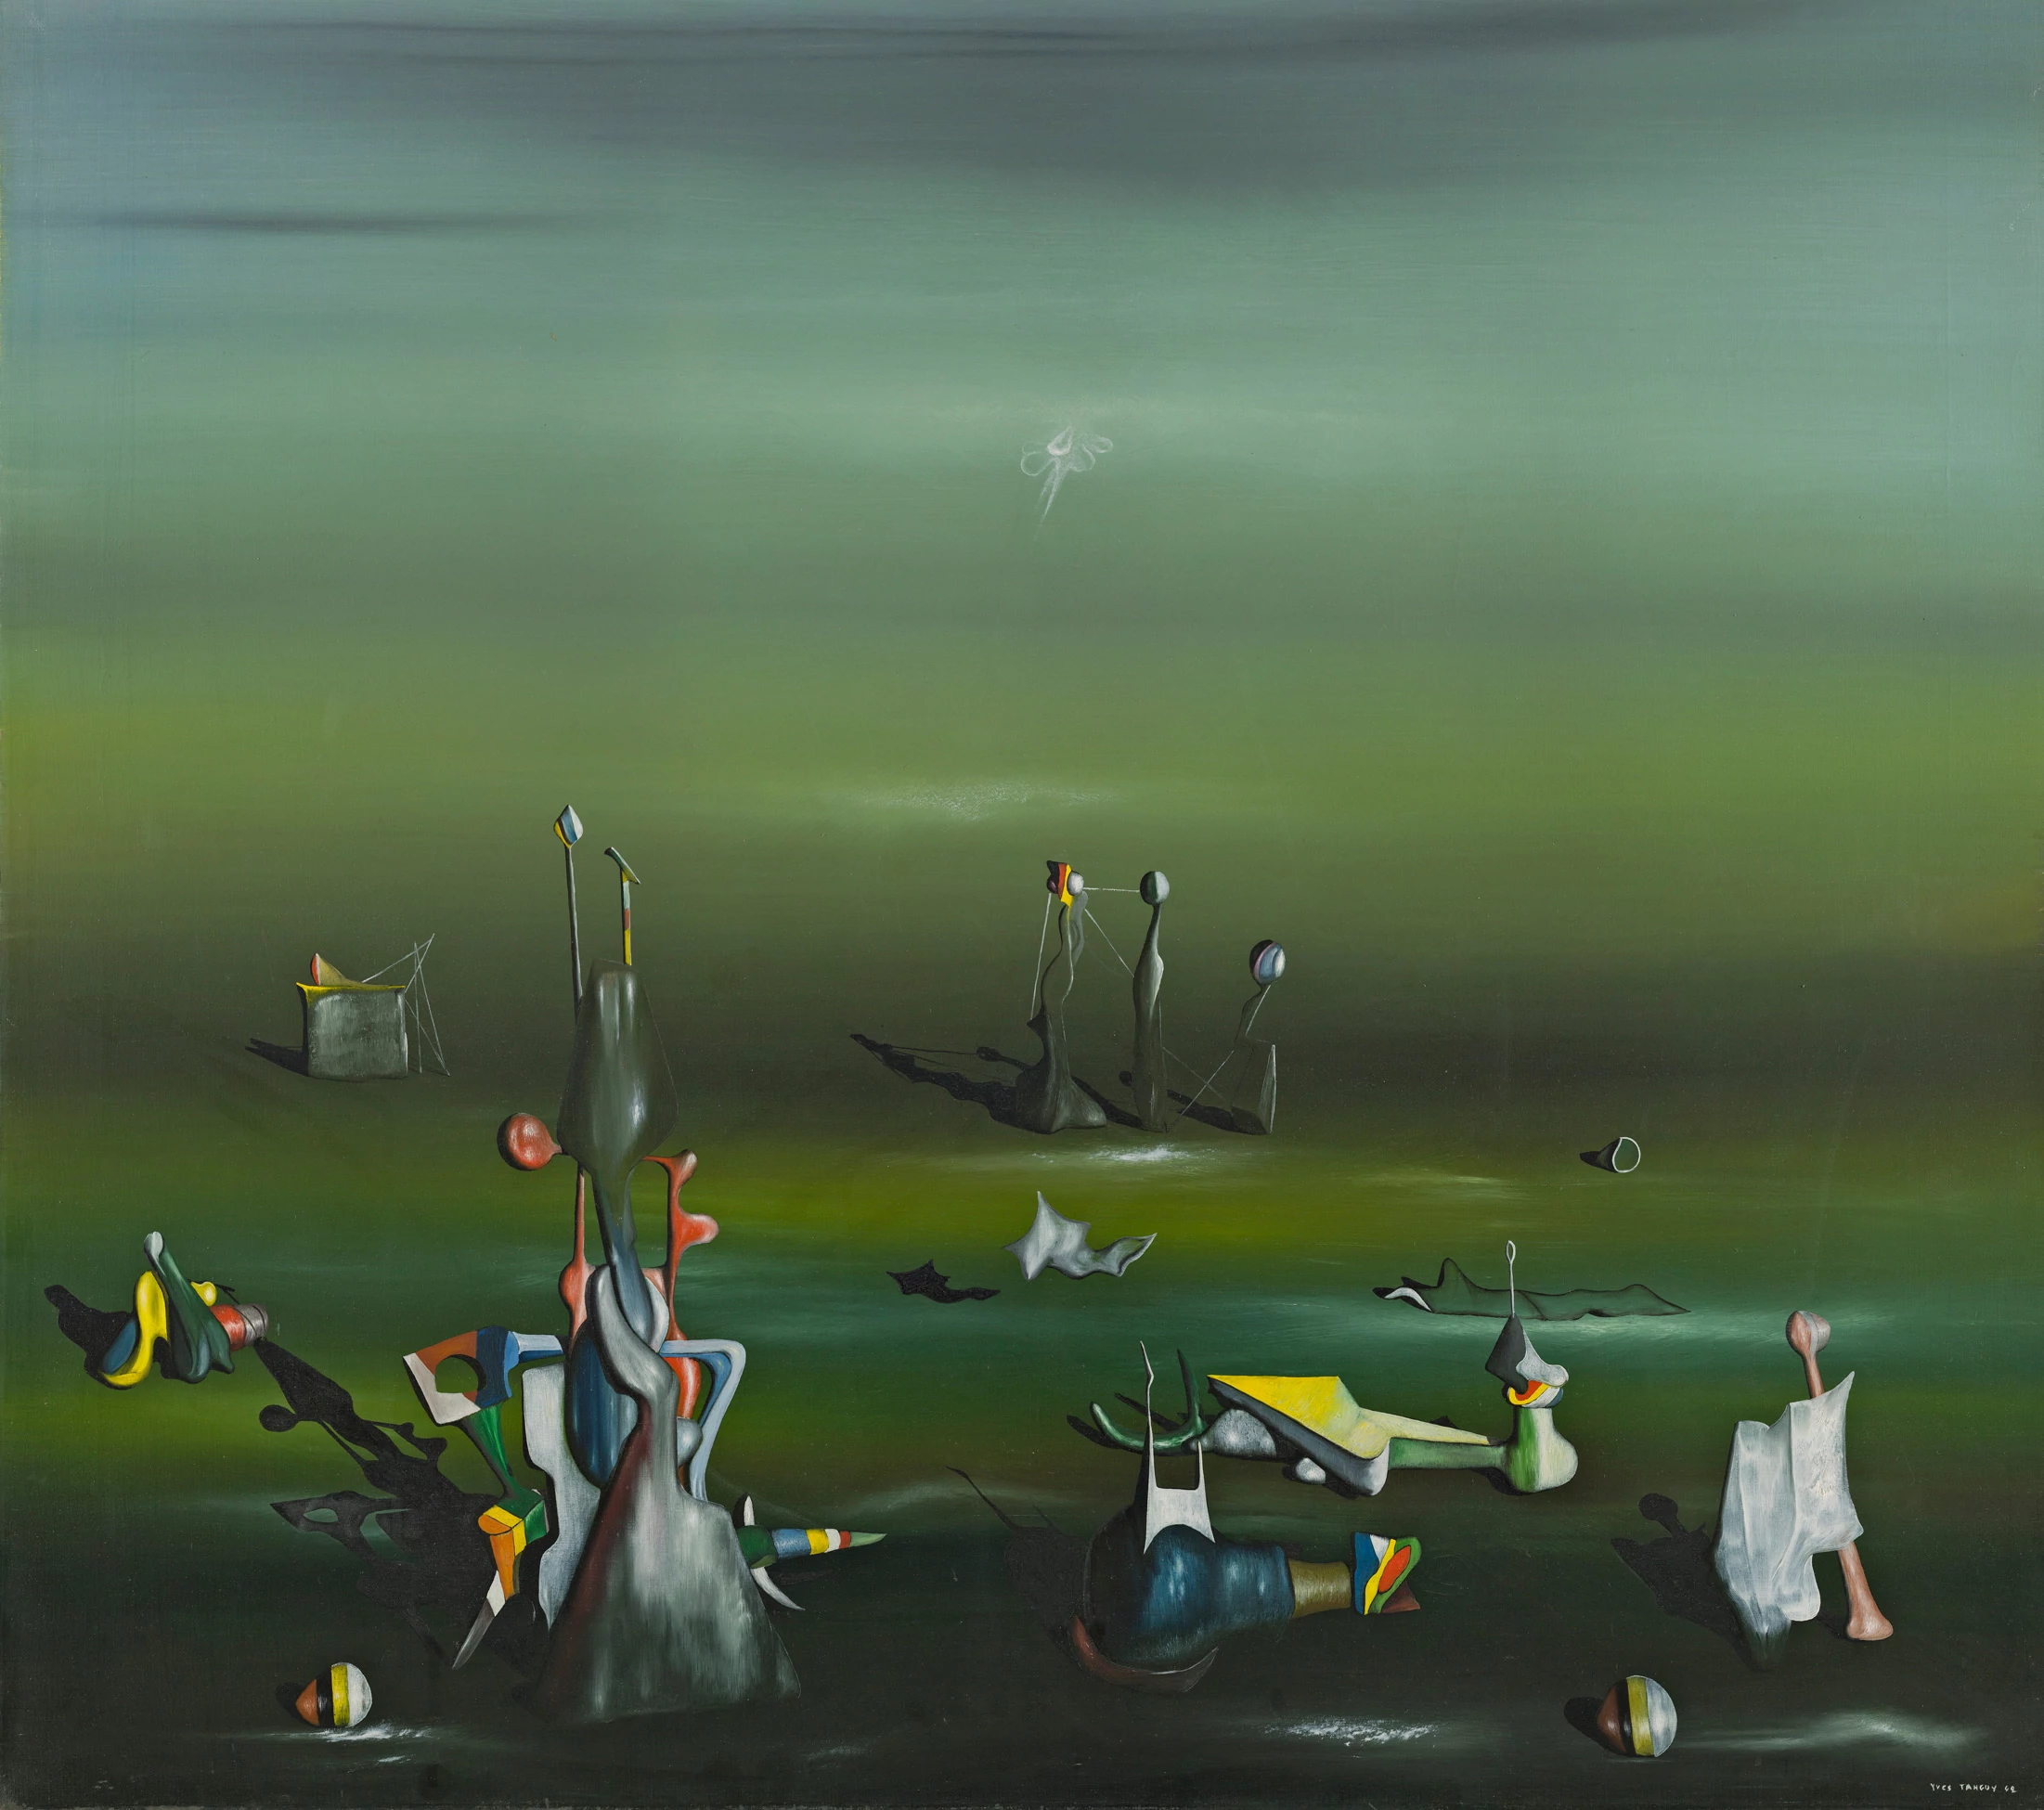 Yves Tanguy, The Artists